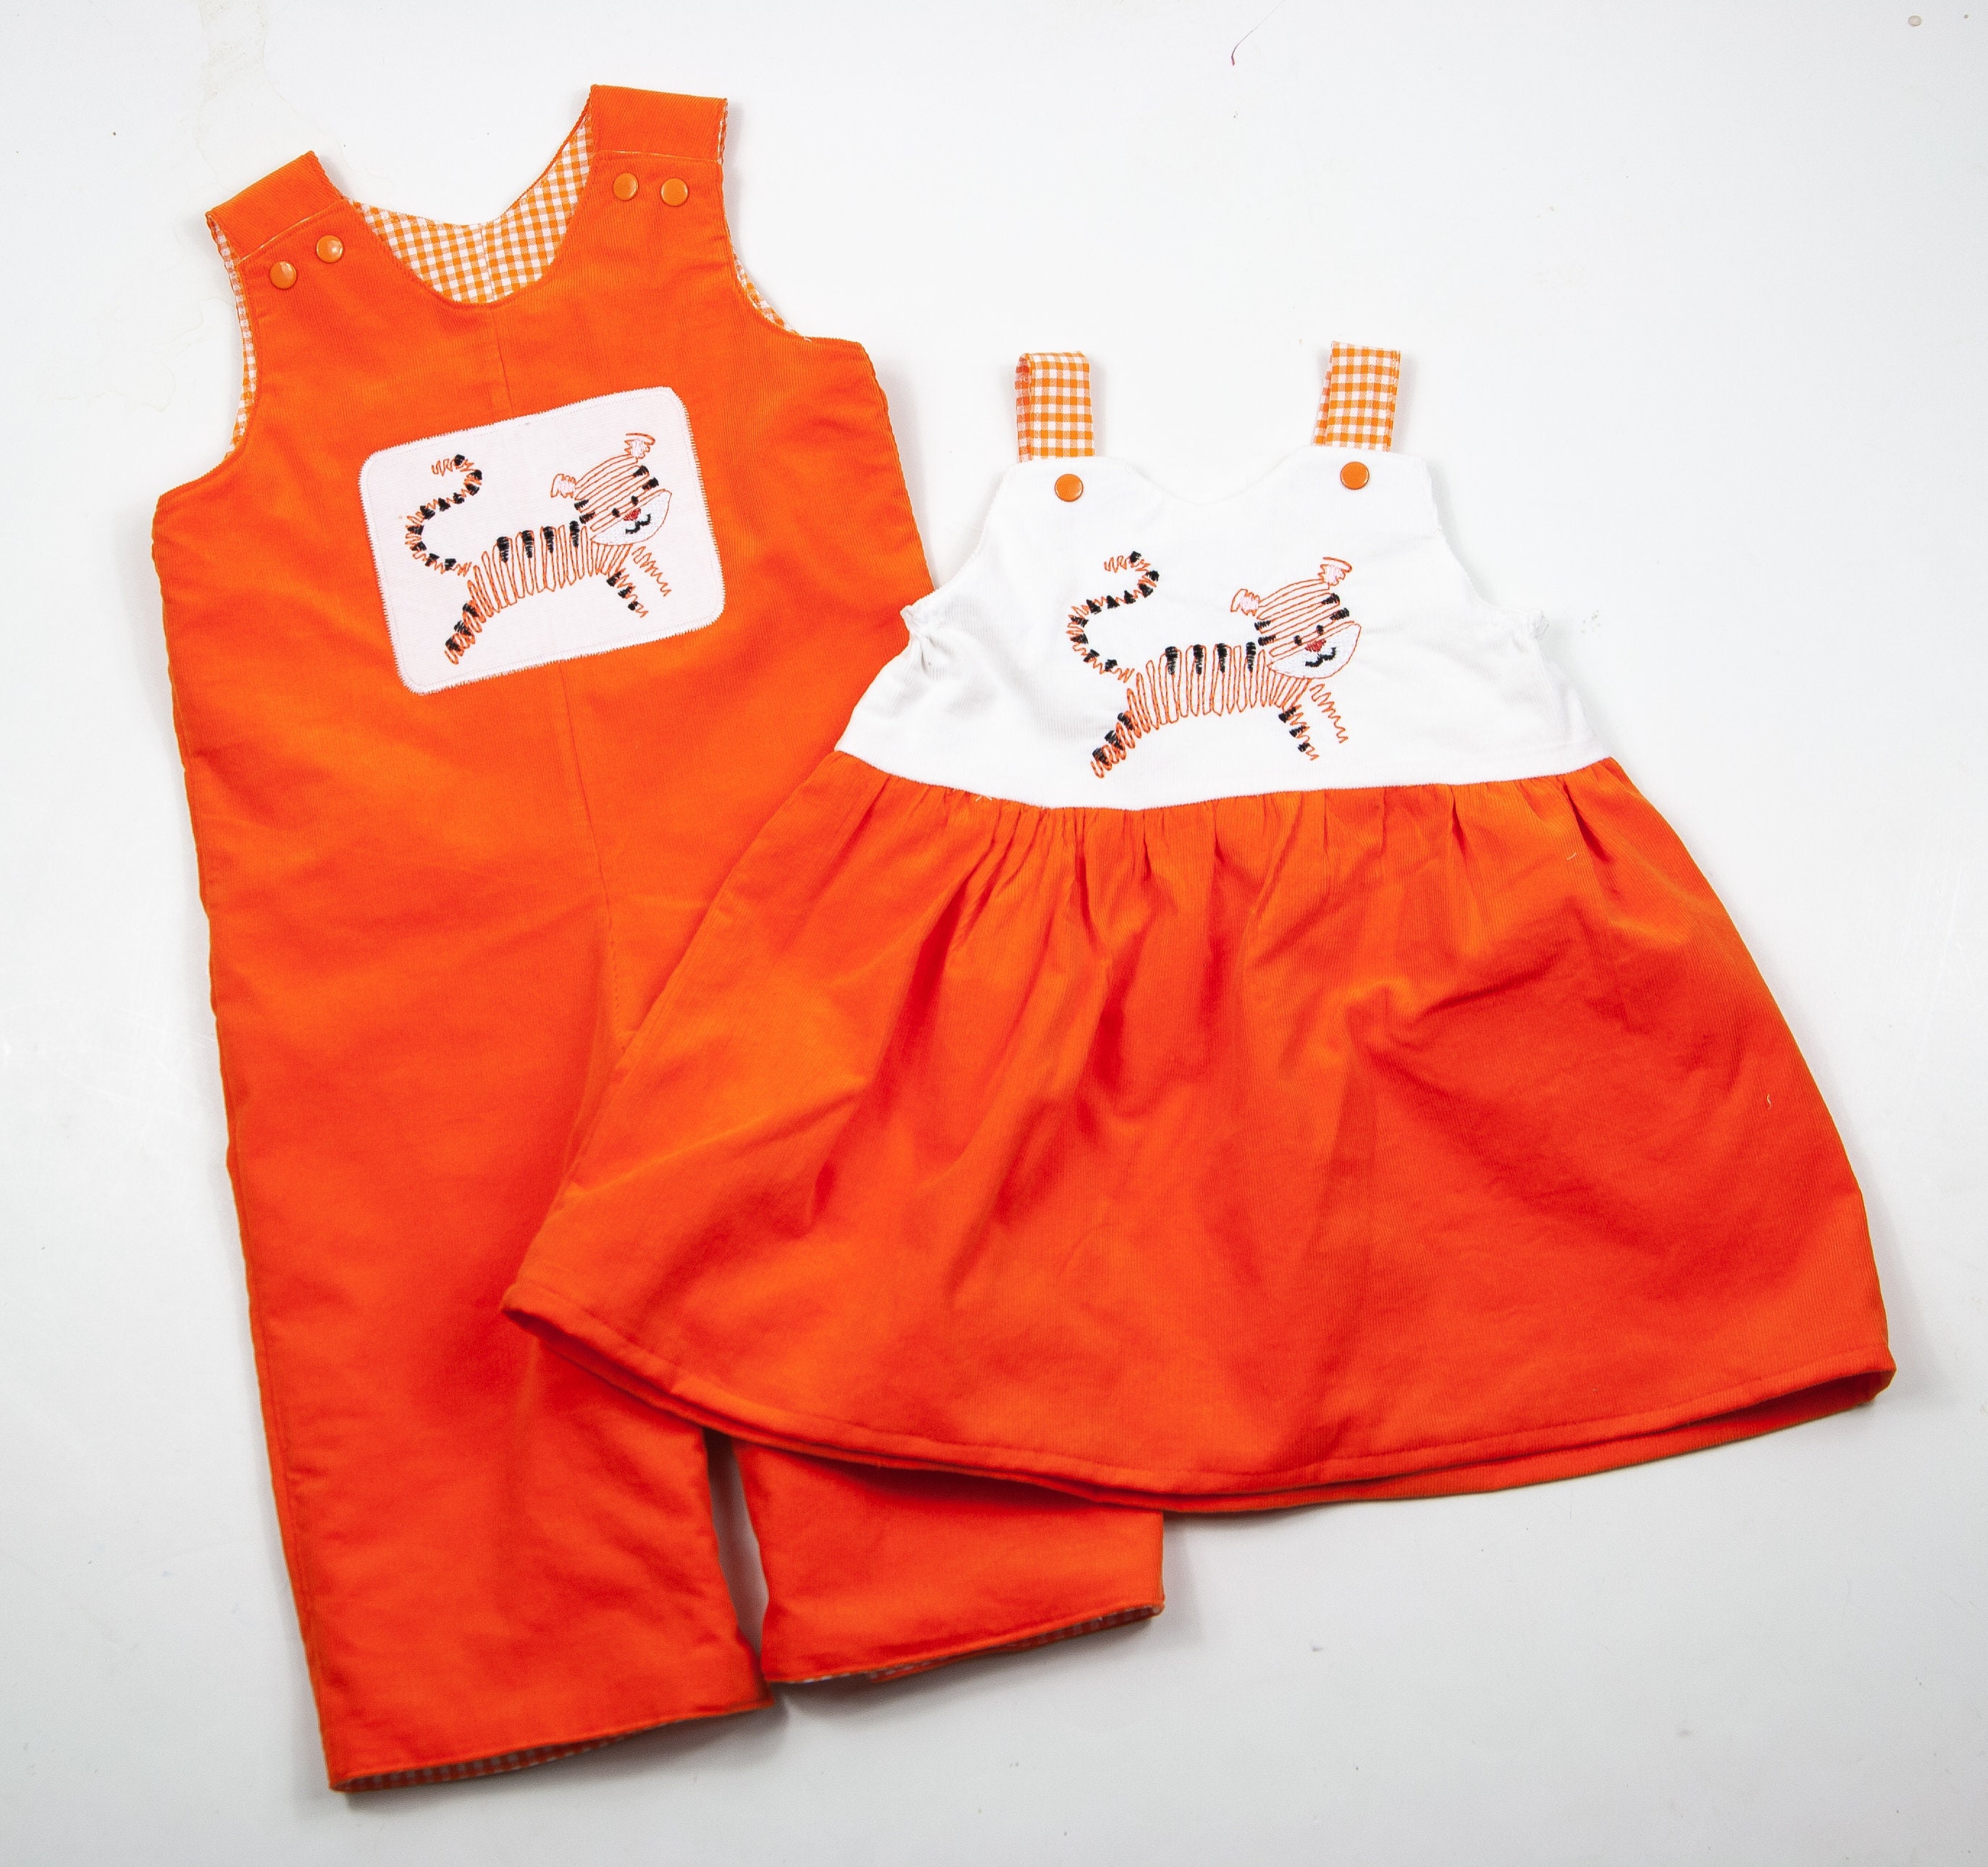 Detroit Tigers 18 Mos.Cute Majestic Infant Girls Navy/Orange Dress Style  Outfit